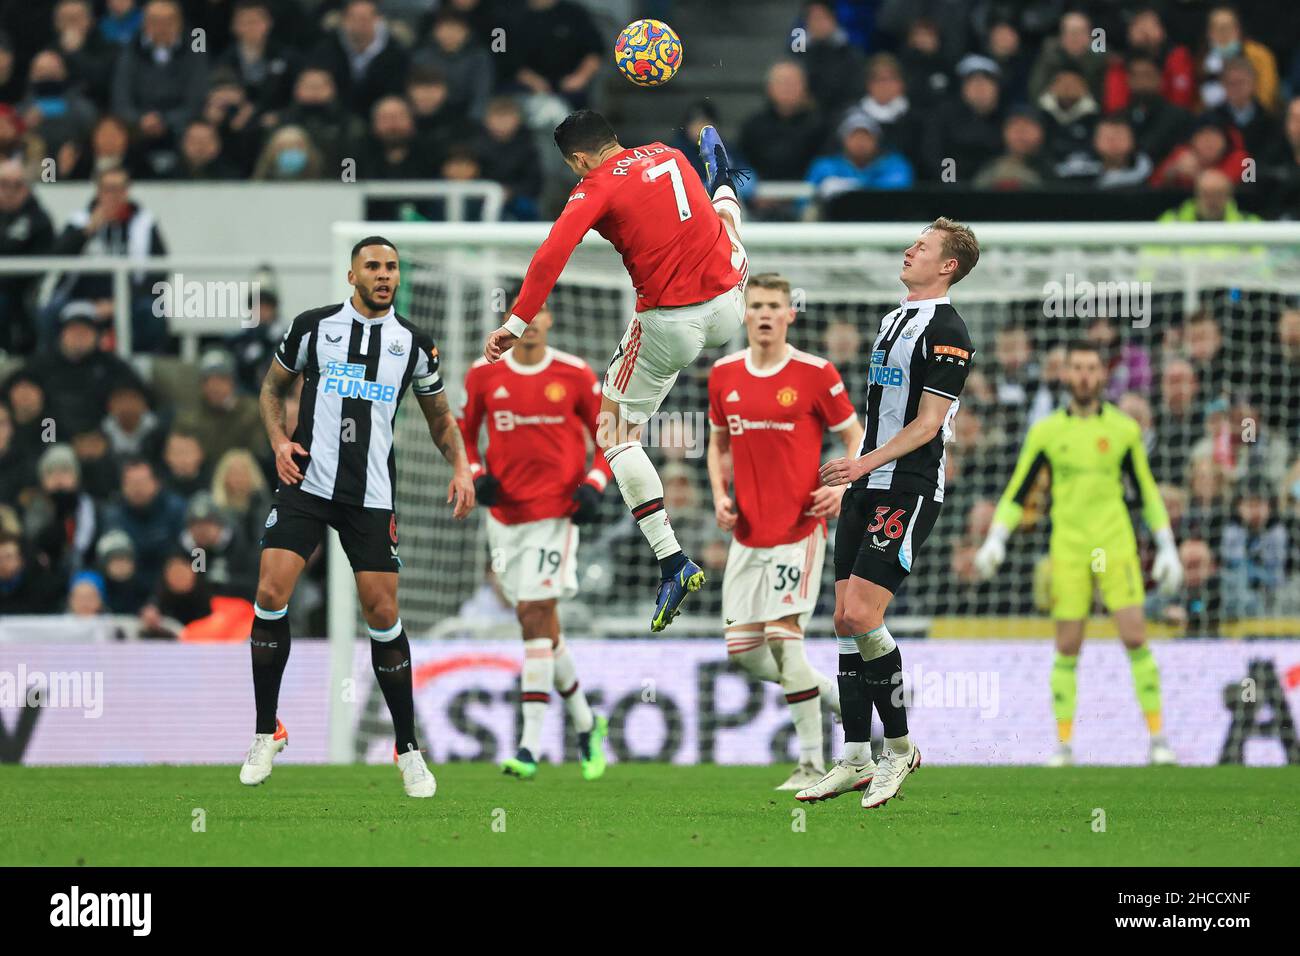 Cristiano Ronaldo #7 of Manchester United clears the ball in, on 12/27/2021. (Photo by Mark Cosgrove/News Images/Sipa USA) Credit: Sipa USA/Alamy Live News Stock Photo